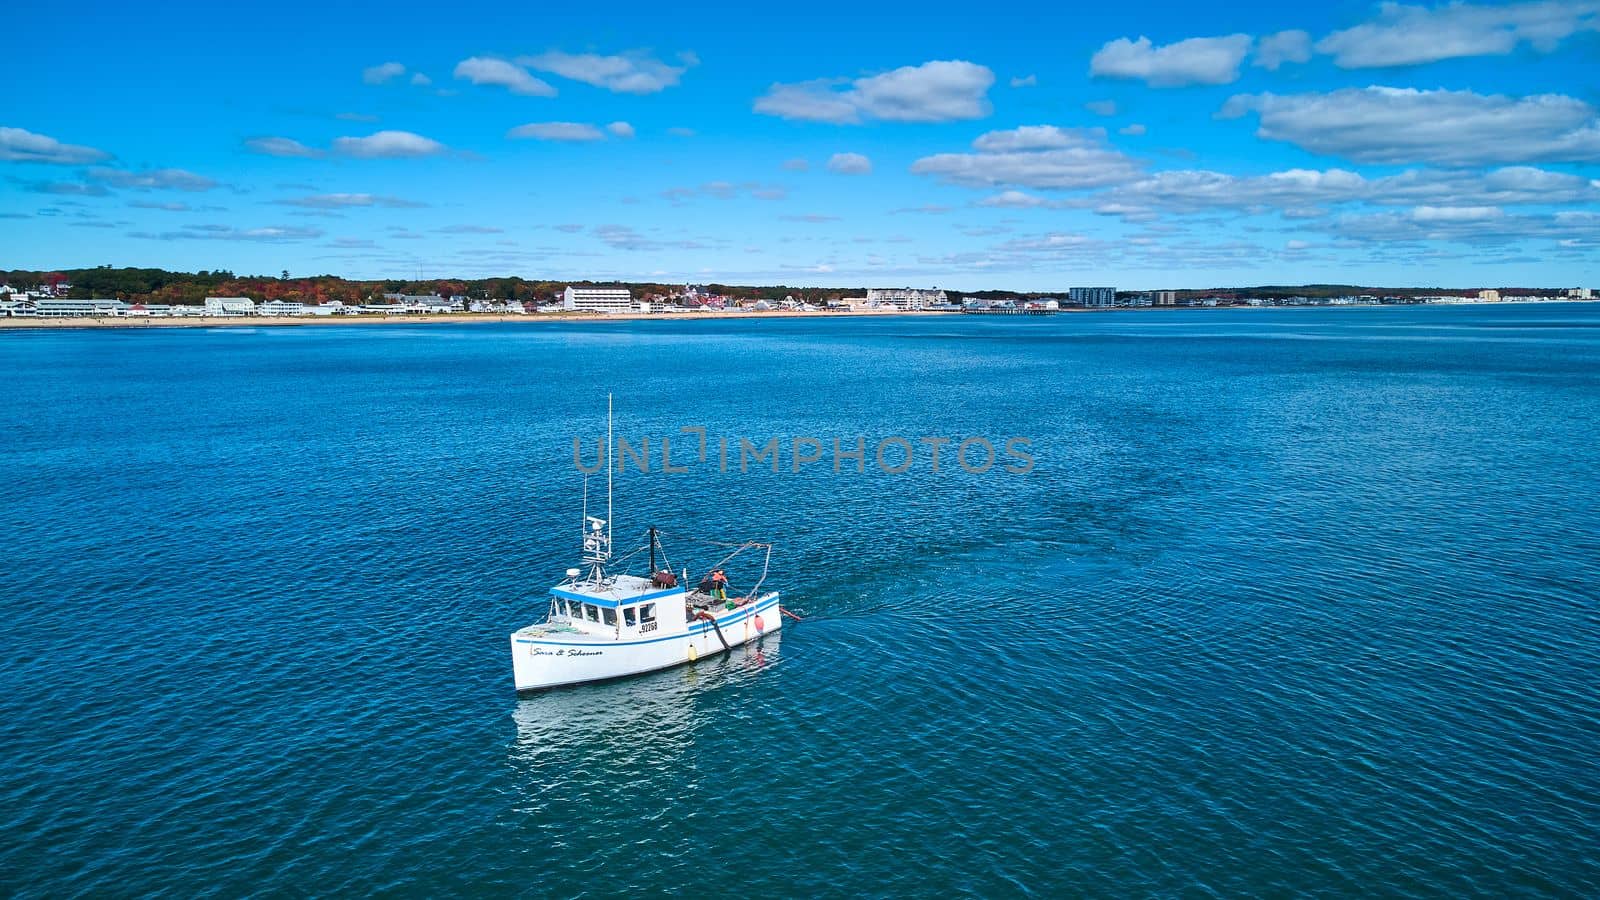 Fishing boat off coast of Maine with distant view of coast by njproductions